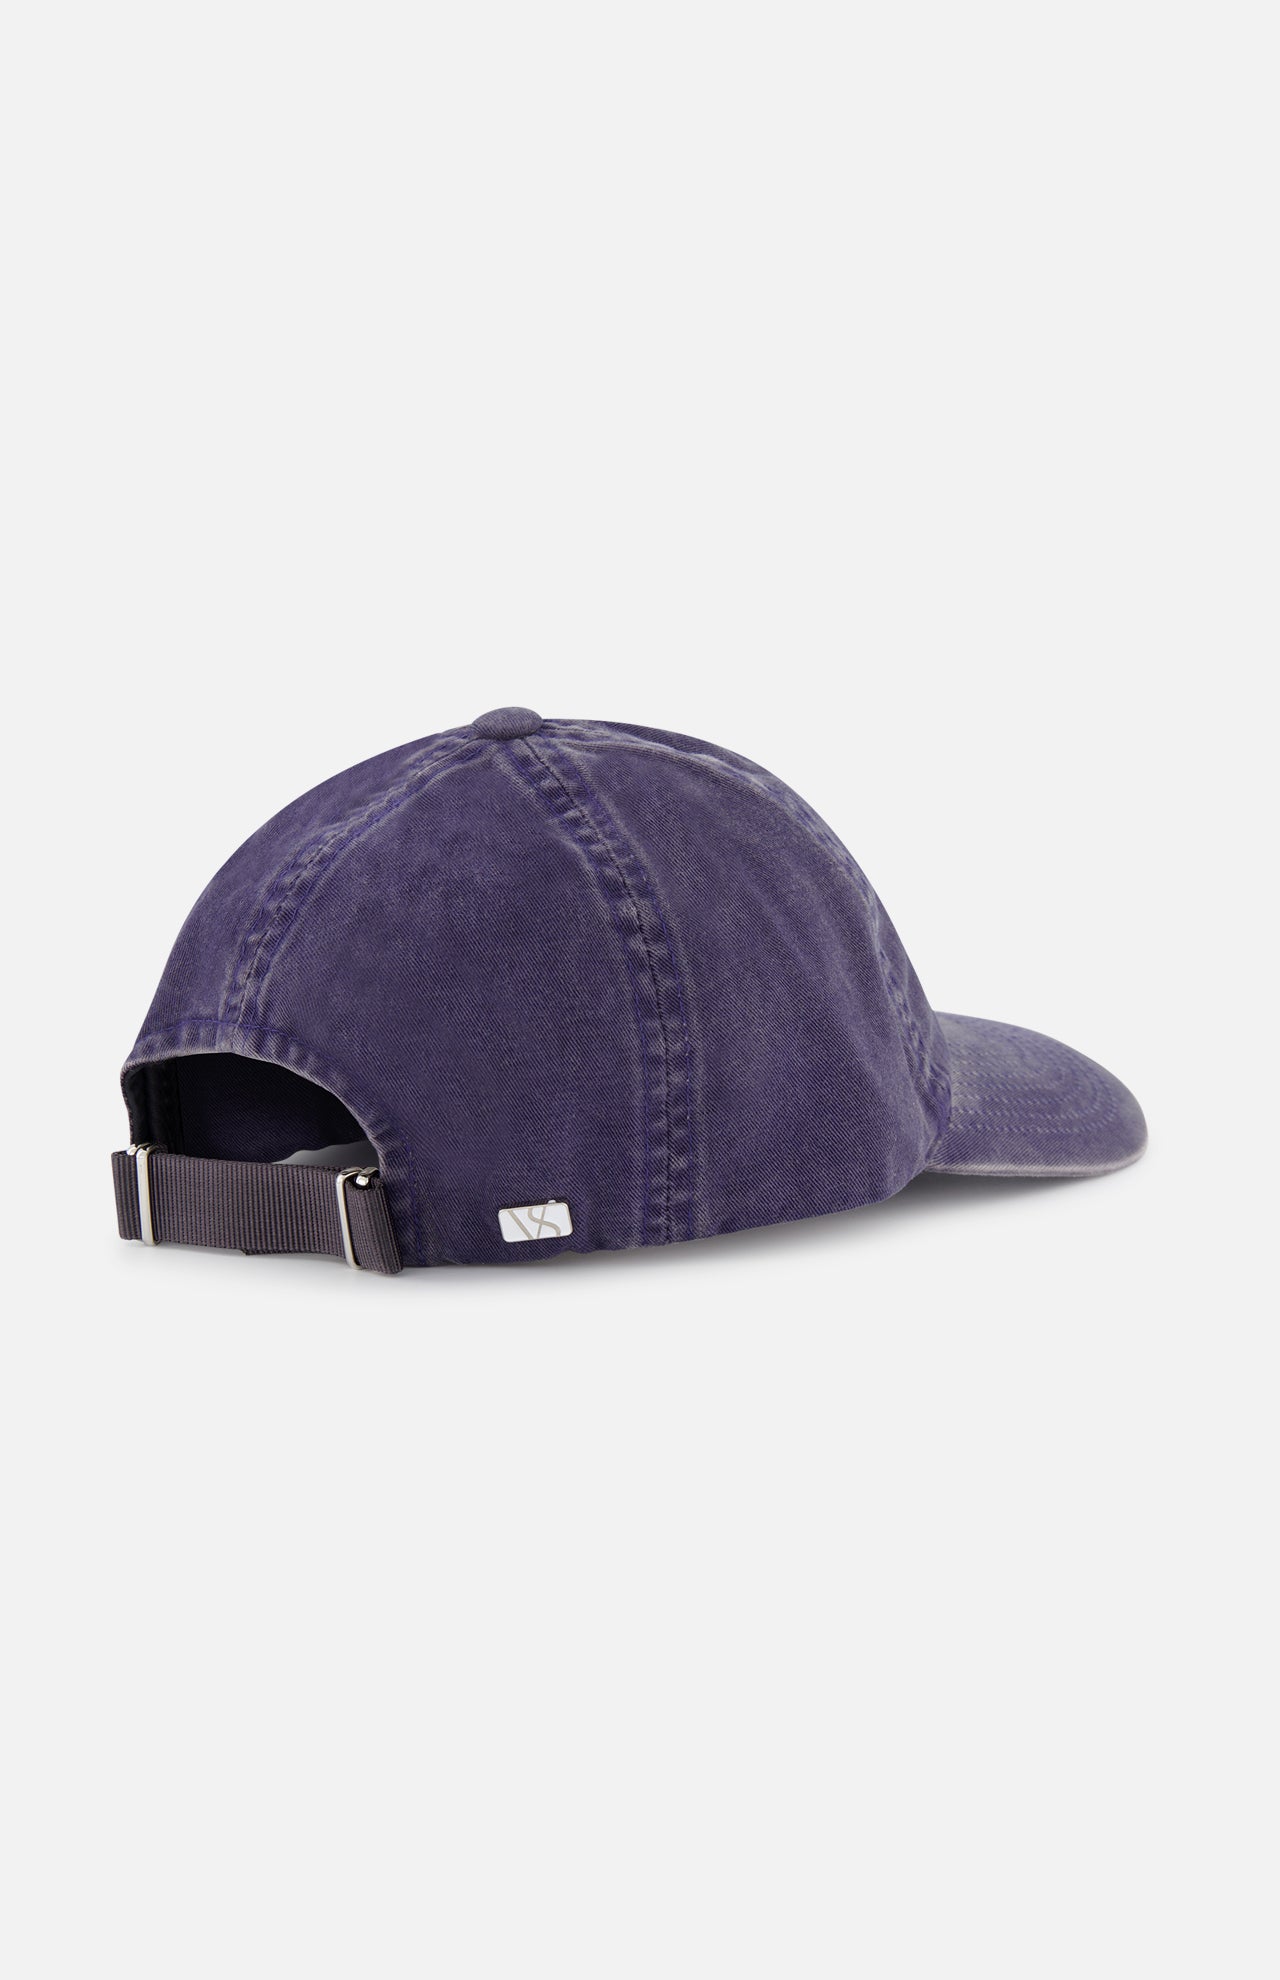 Navy Washed Cotton Cap (7387215921267)